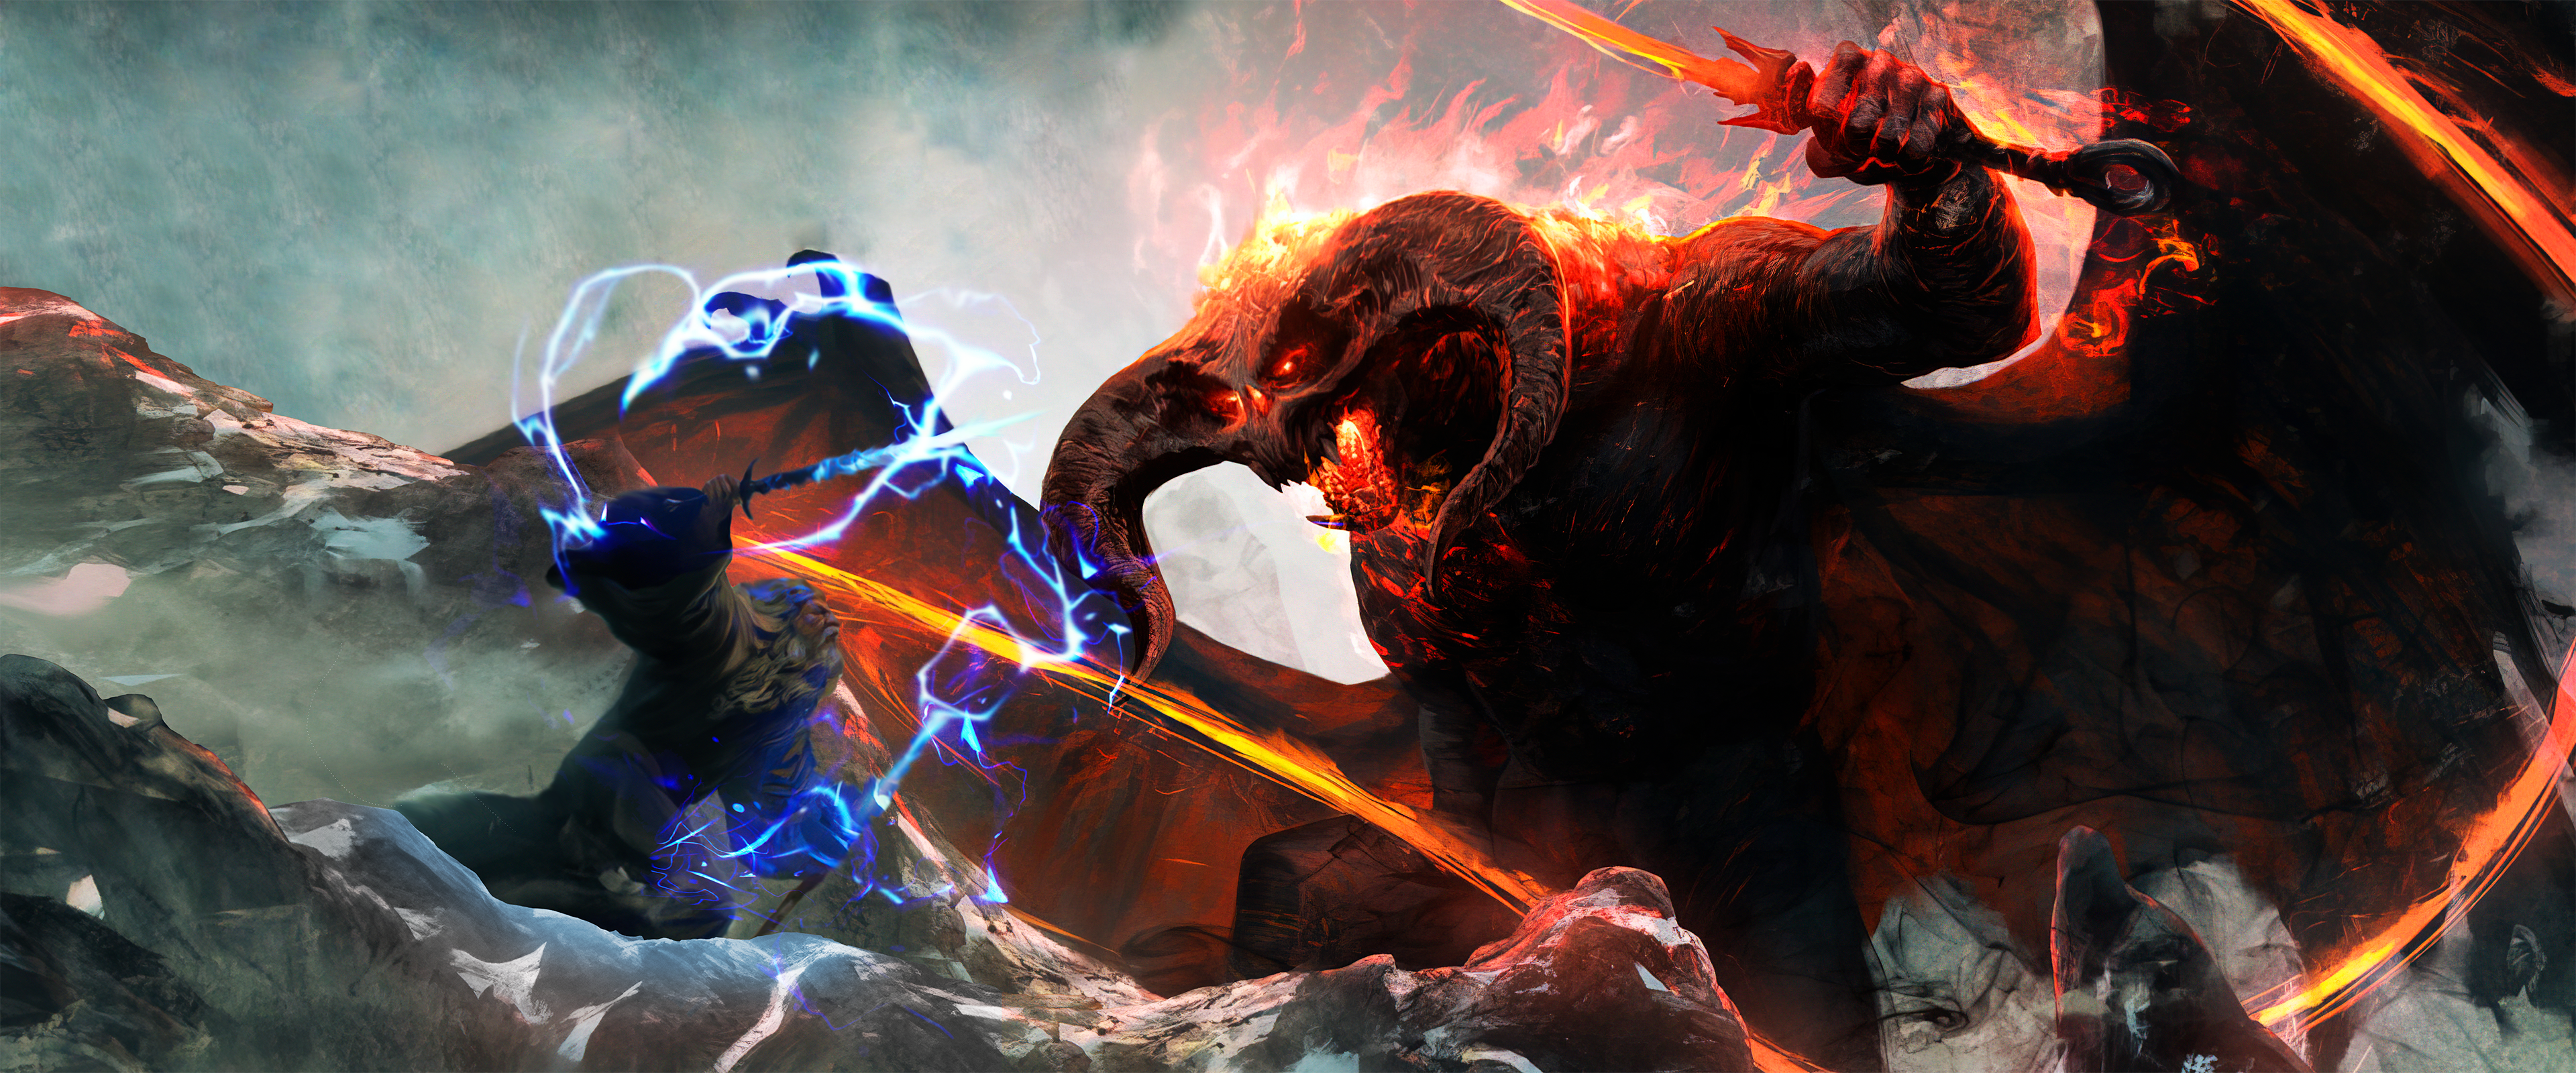 General 3840x1600 Gandalf Balrog The Lord of the Rings Middle Earth digital art